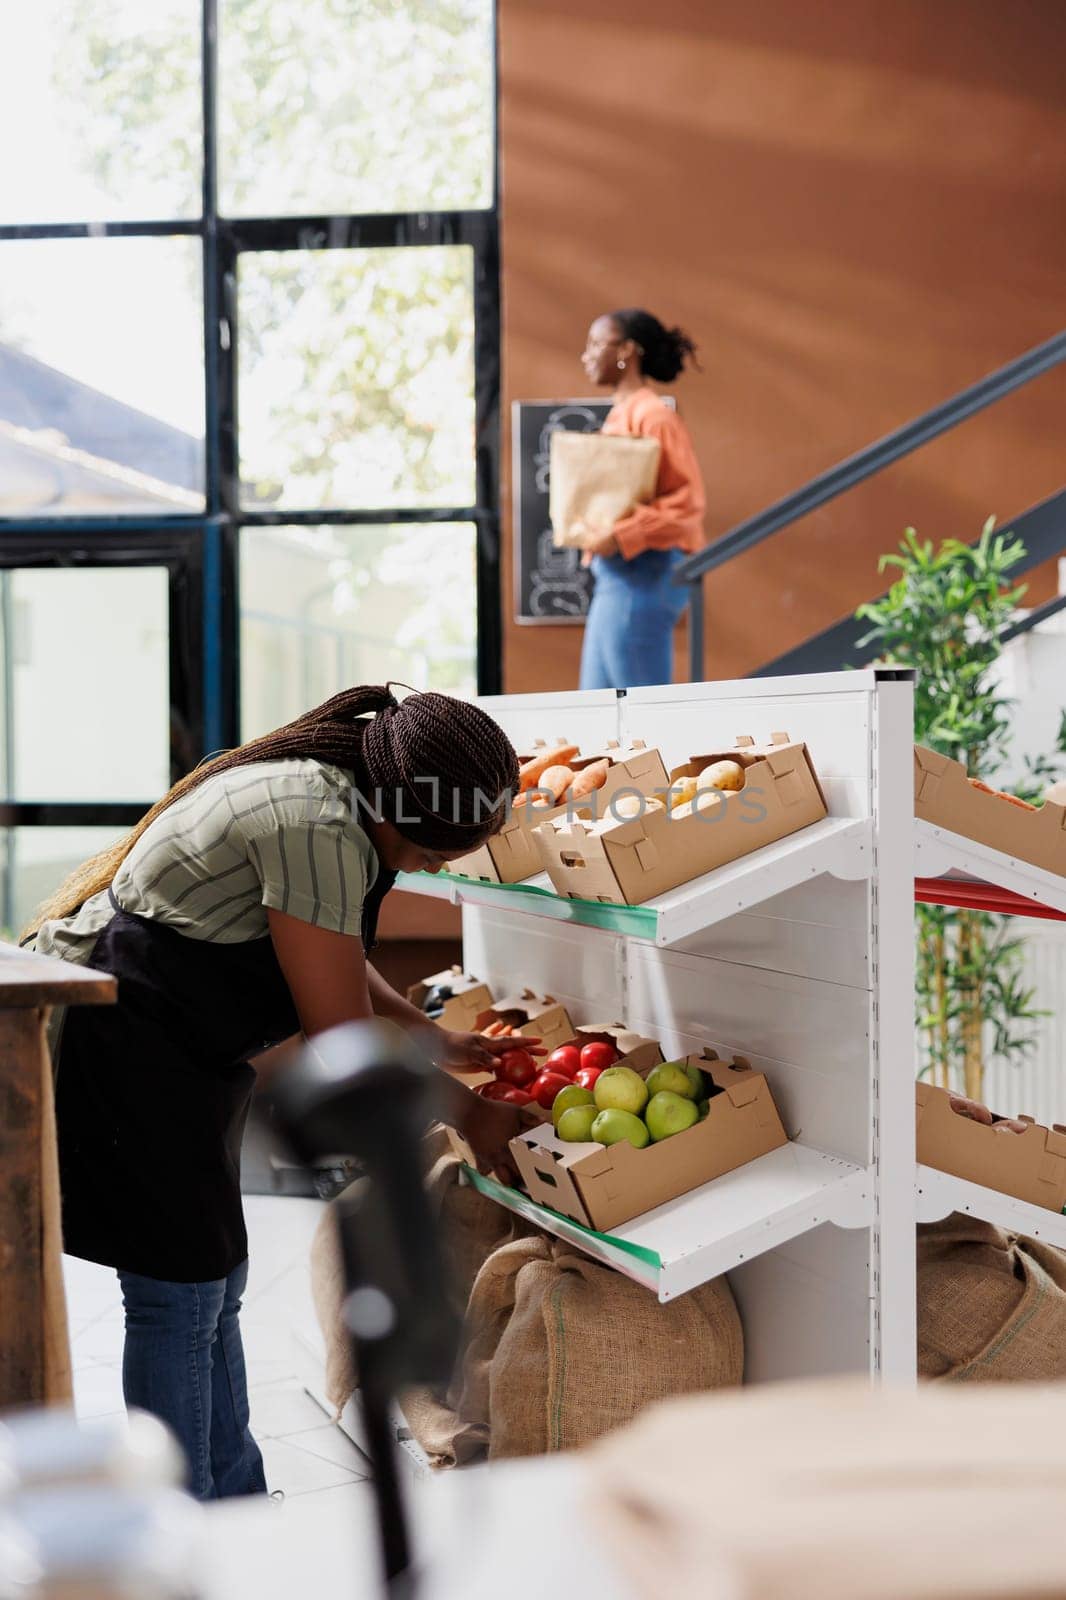 In bio food market, female seller wearing an apron organizes homegrown fruits and vegetables on shelves. In eco friendly grocery store, African American vendor inspects fresh organic produce.